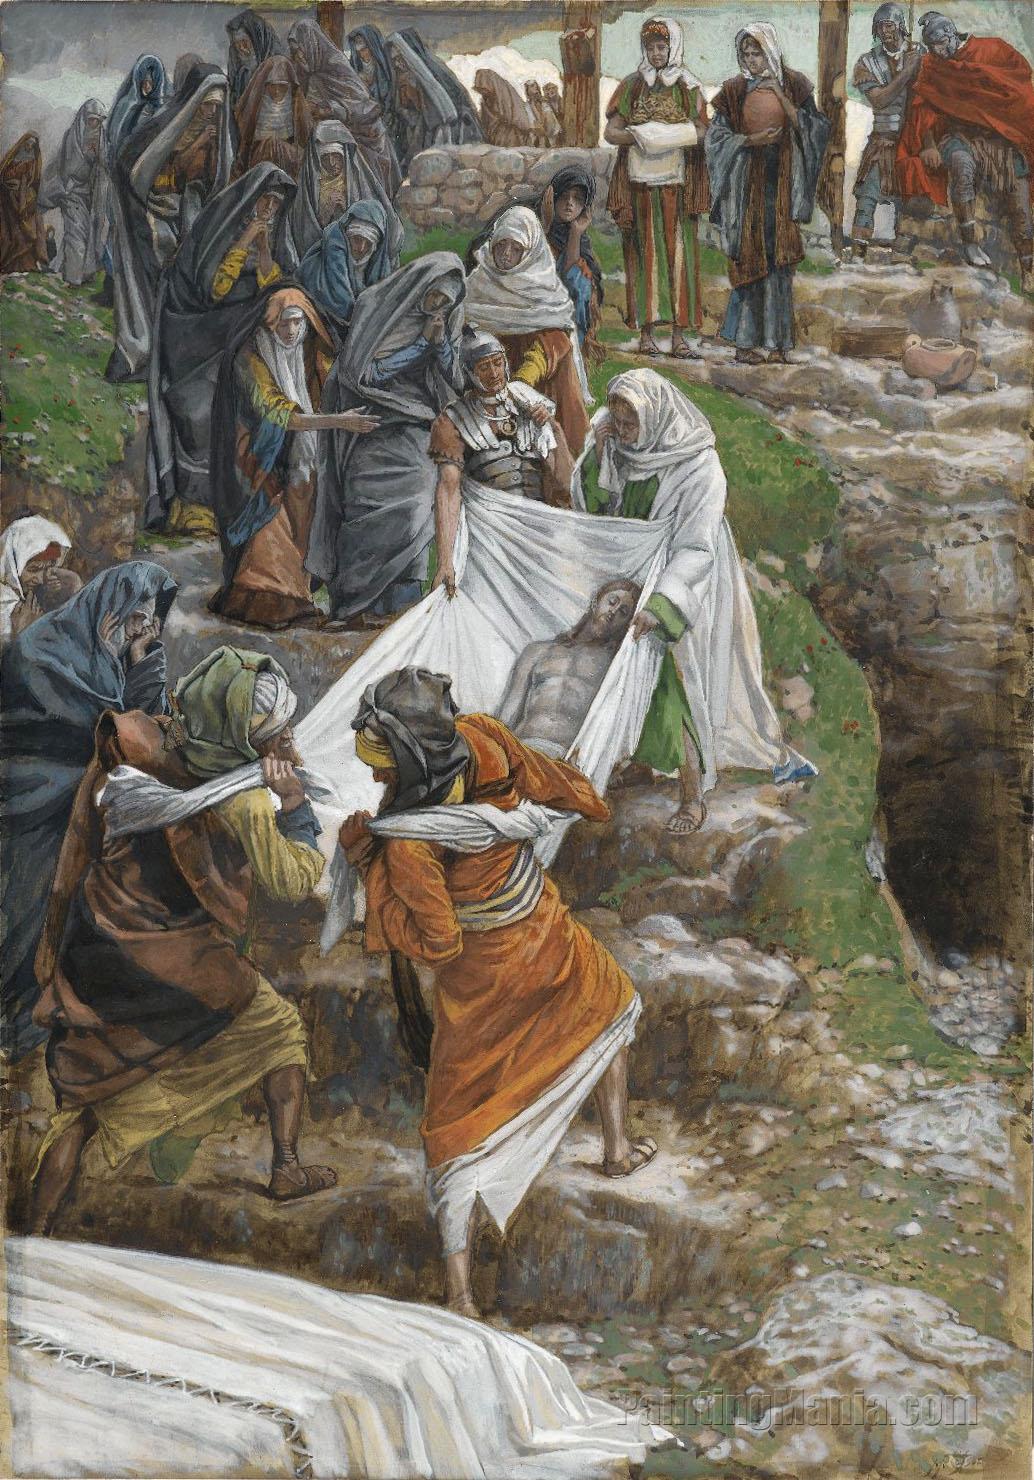 The Body of Jesus Carried to the Anointing Stone